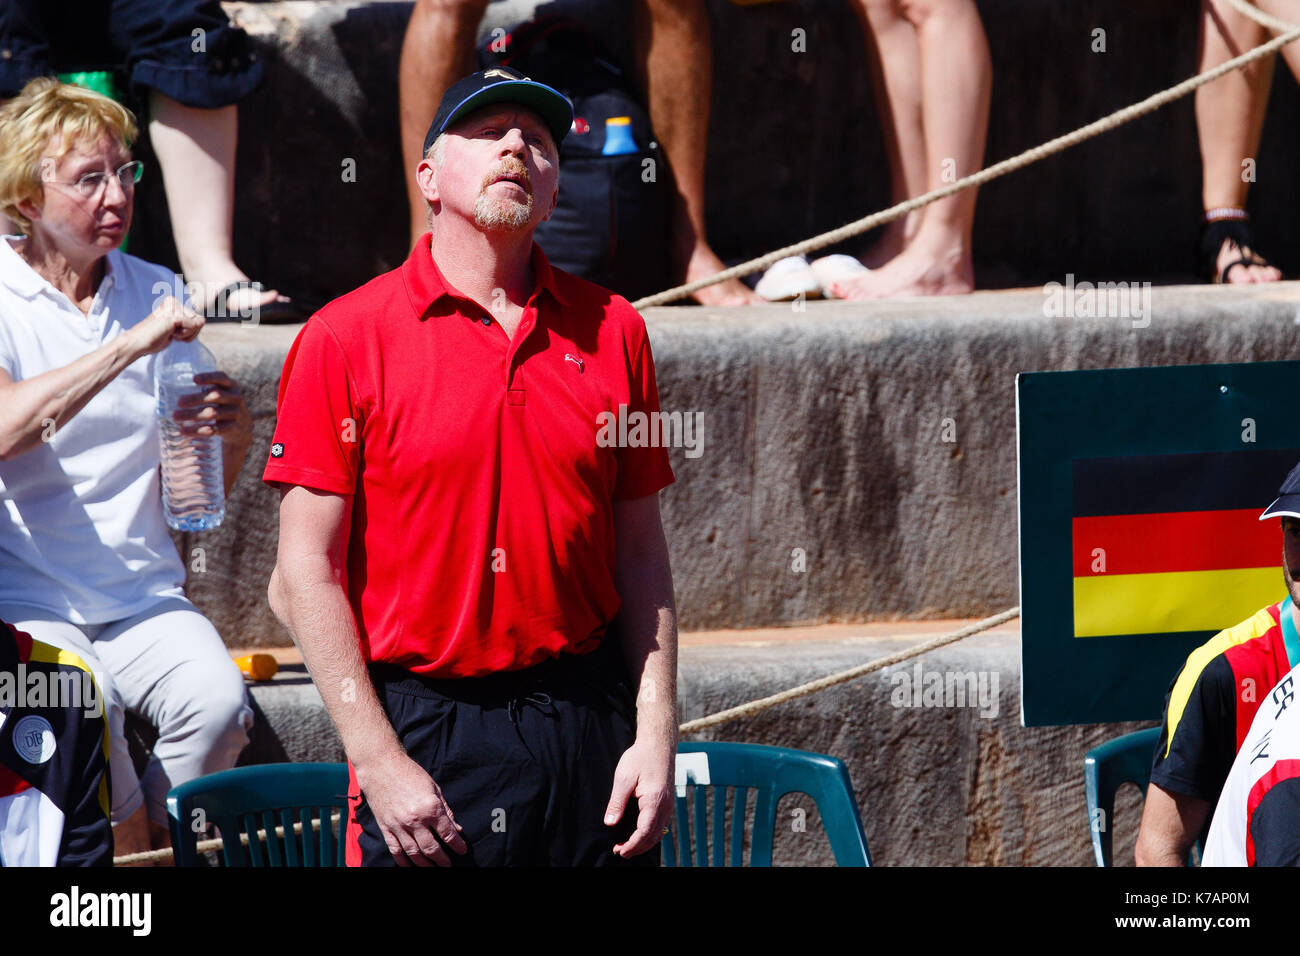 Oeiras, Portugal. 15th Sep, 2017. Germany's Head of men's tennis, Boris Becker, during the Davis Cup Play-Off match between Portugal and Germany at the Centro Desportivo Nacional Jamor in Oeiras/Lisbon. Credit: Frank Molter/Alamy Live News Stock Photo